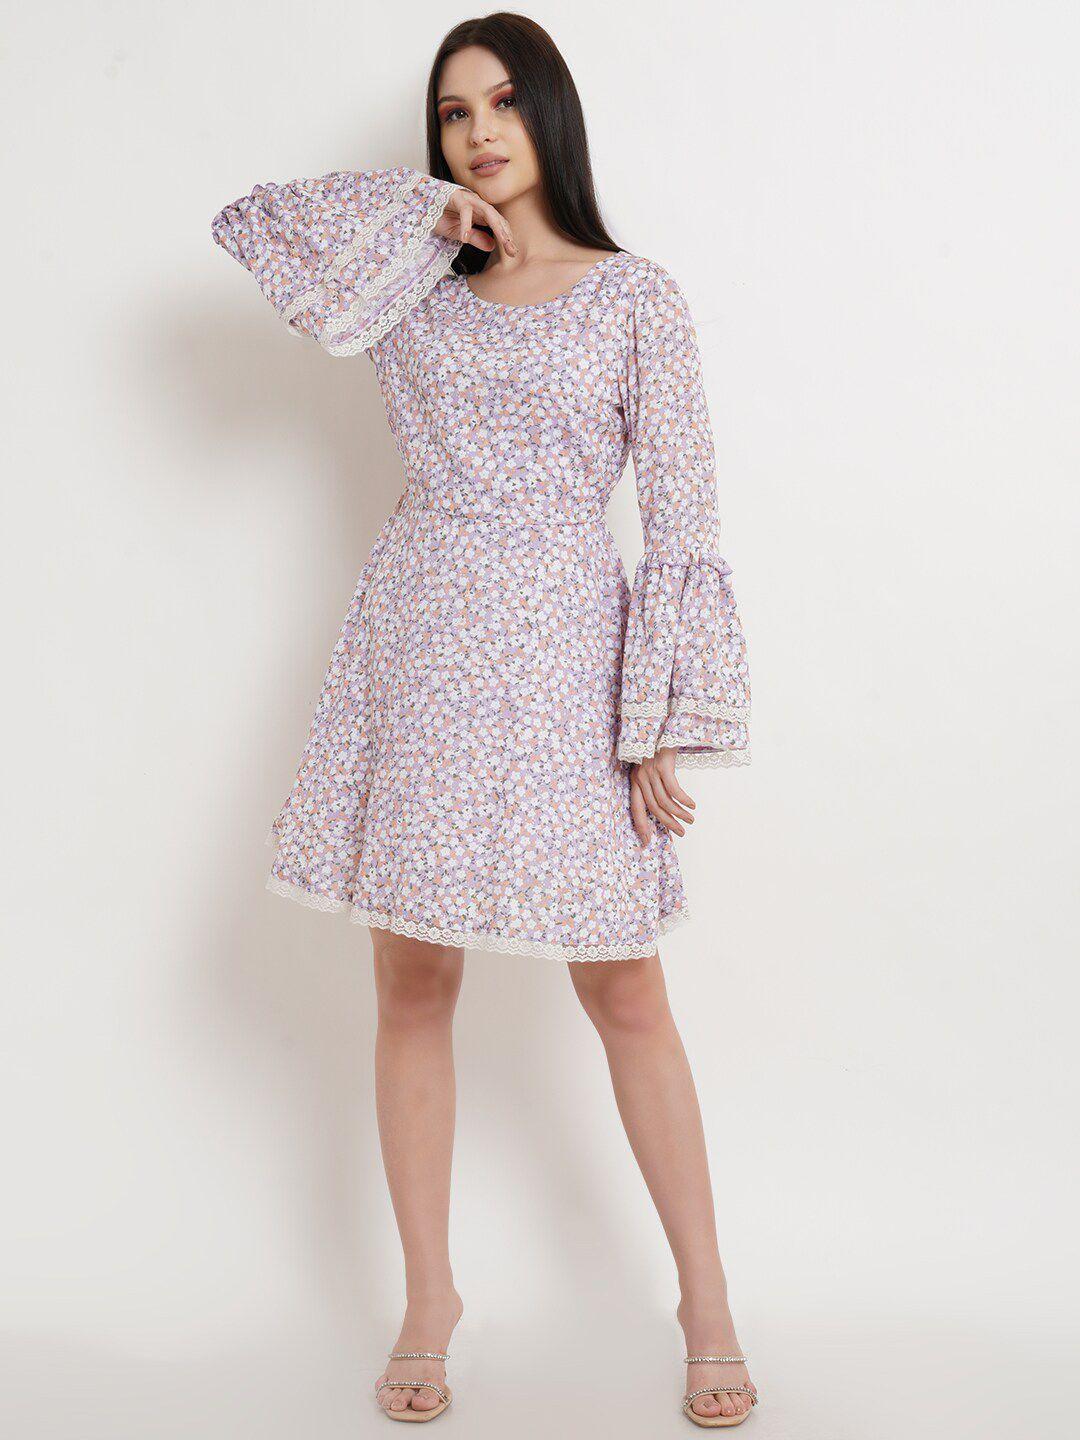 dodo & moa women violet and peach floral printed  dress